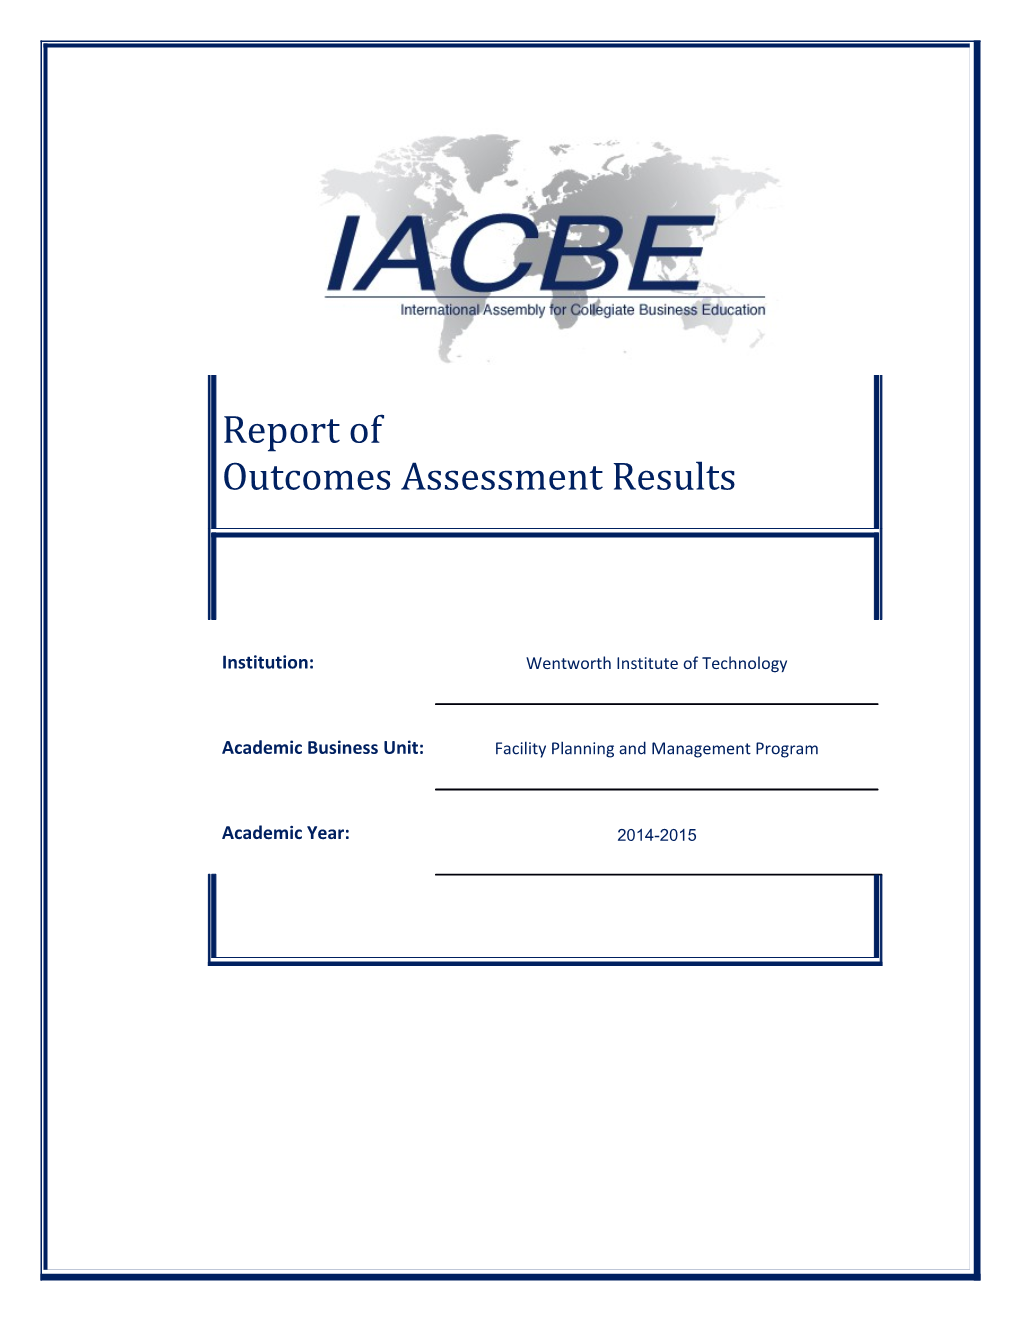 Outcomes Assessment